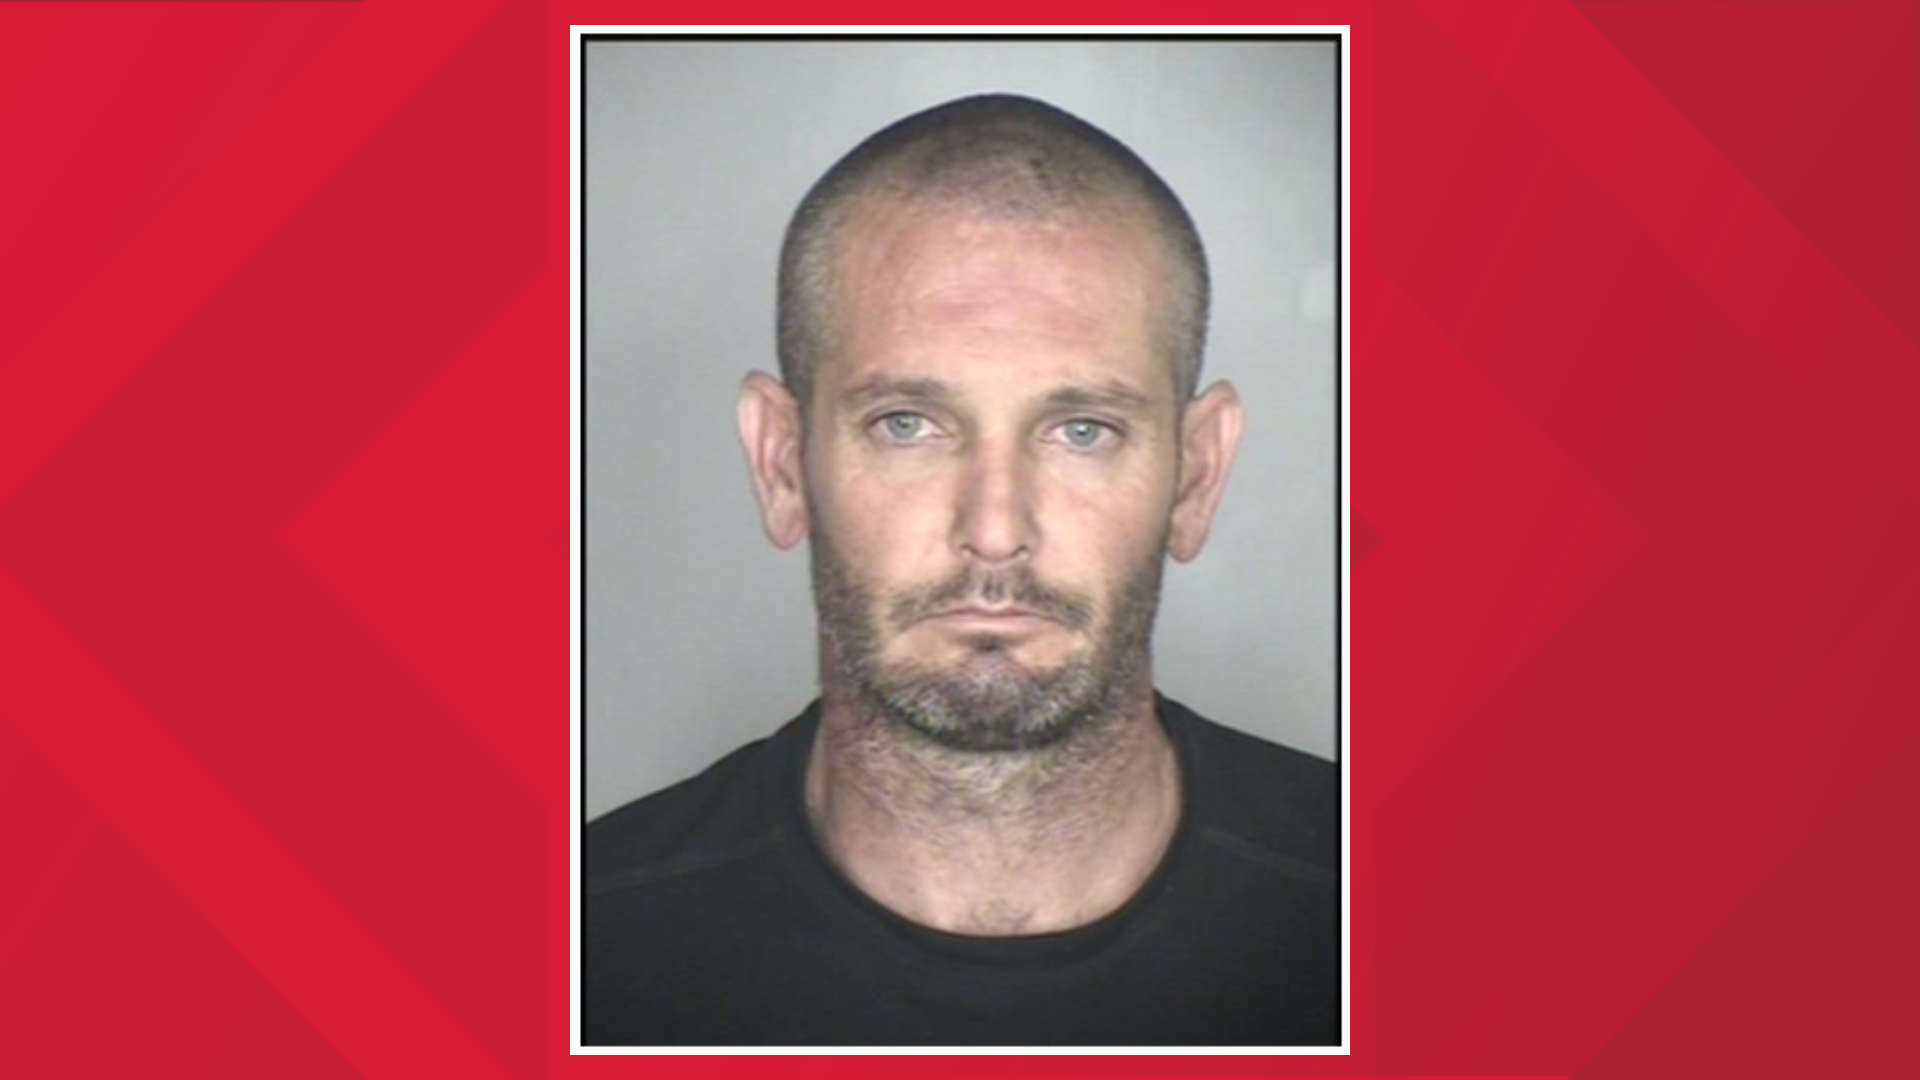 Sierra County Sheriff said 40-year-old John Thomas Conway was arrested after he attempted to run over wildlife officers at a checkpoint with his UTV.